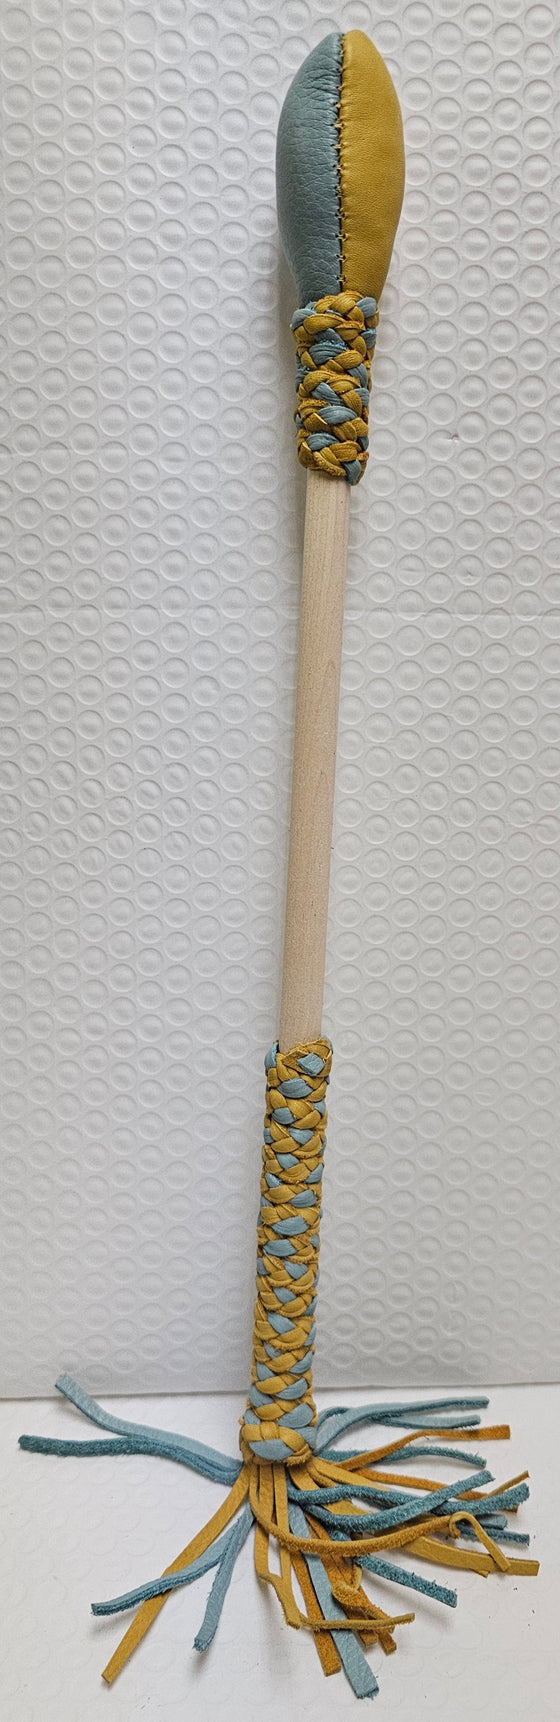 Blue and tan drum stick